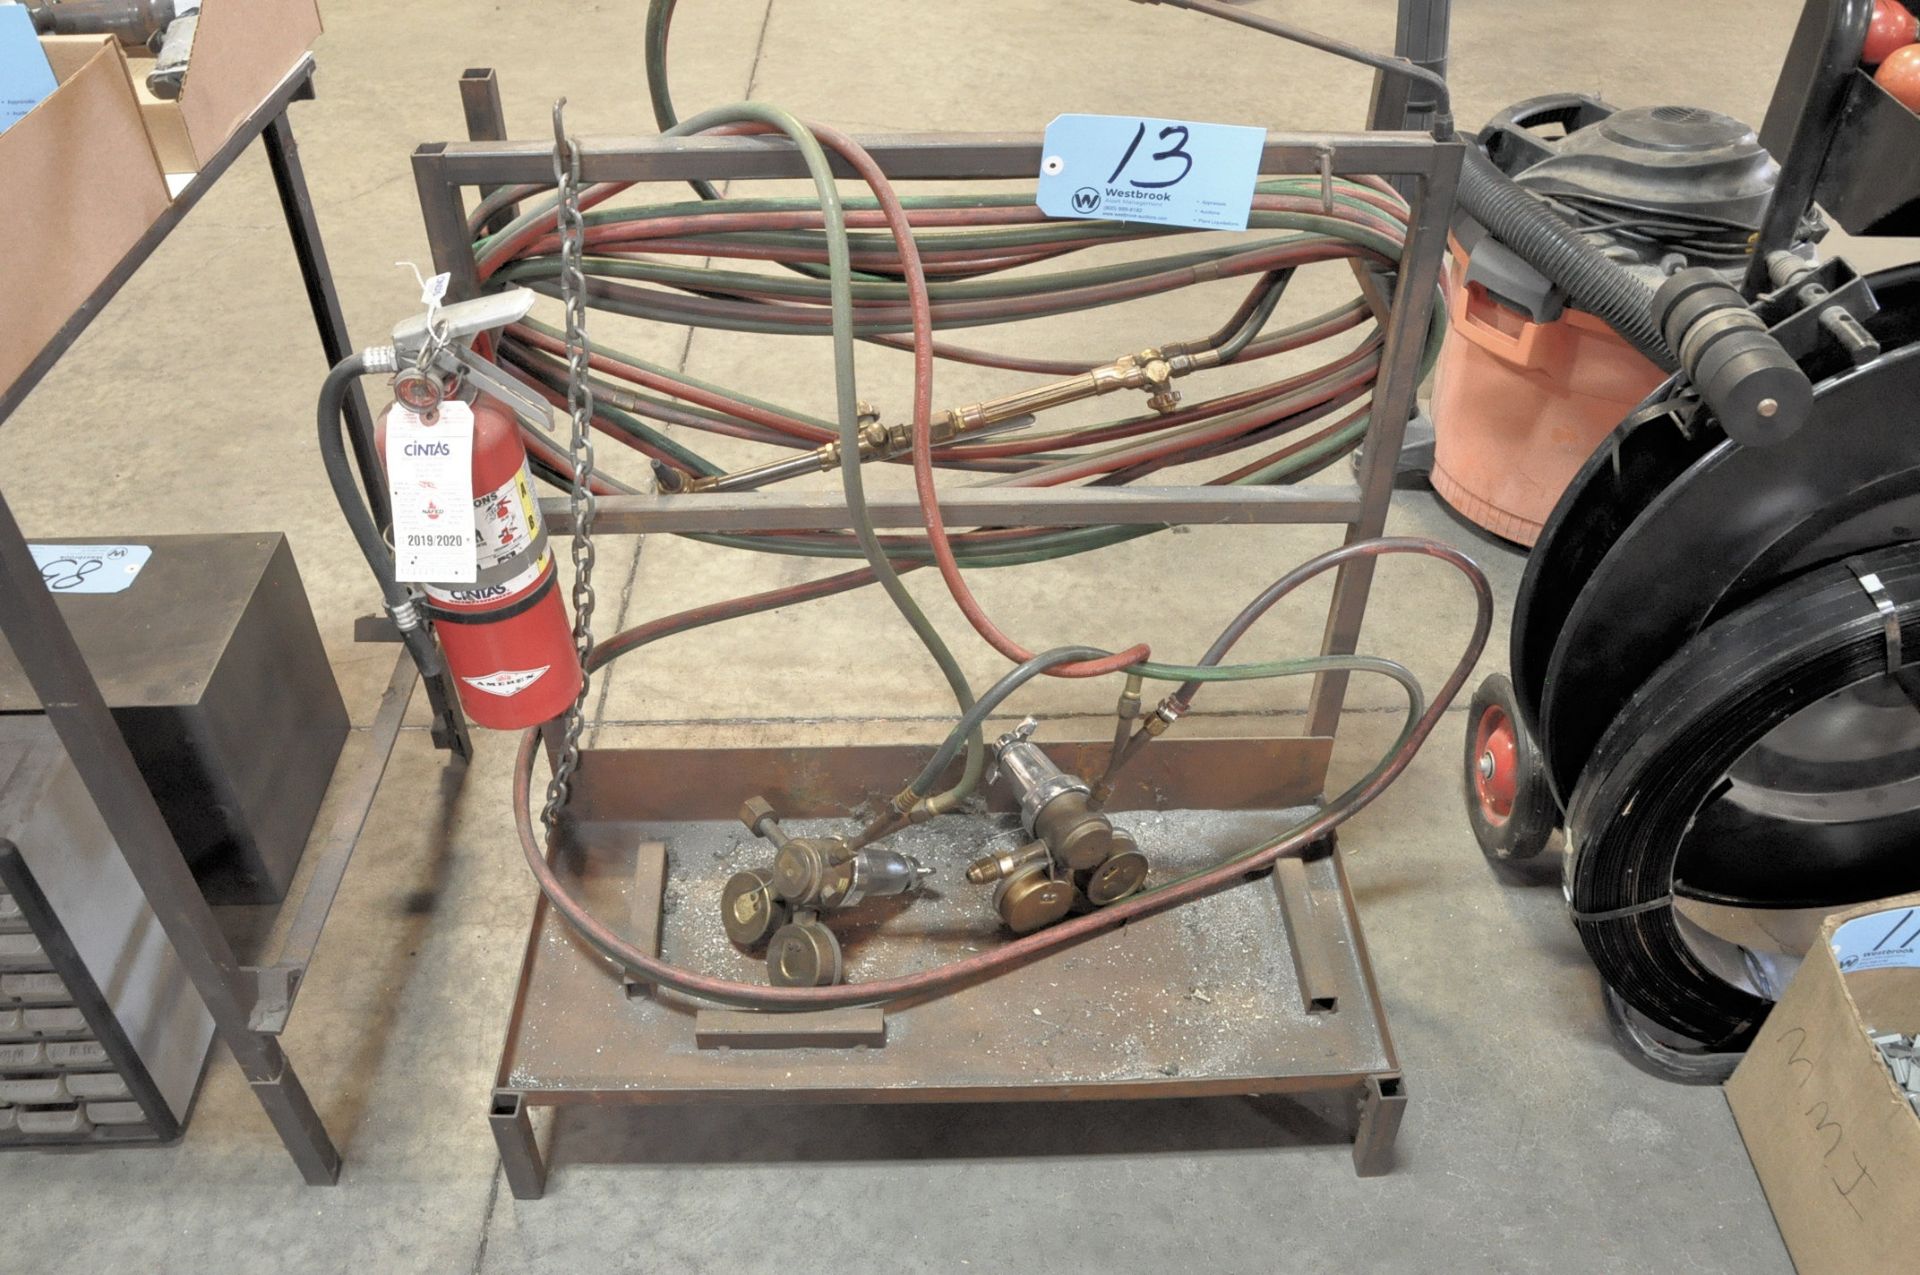 Oxygen/Acetylene Hose with Torches, Gauges, Fire Extinguisher and Stand